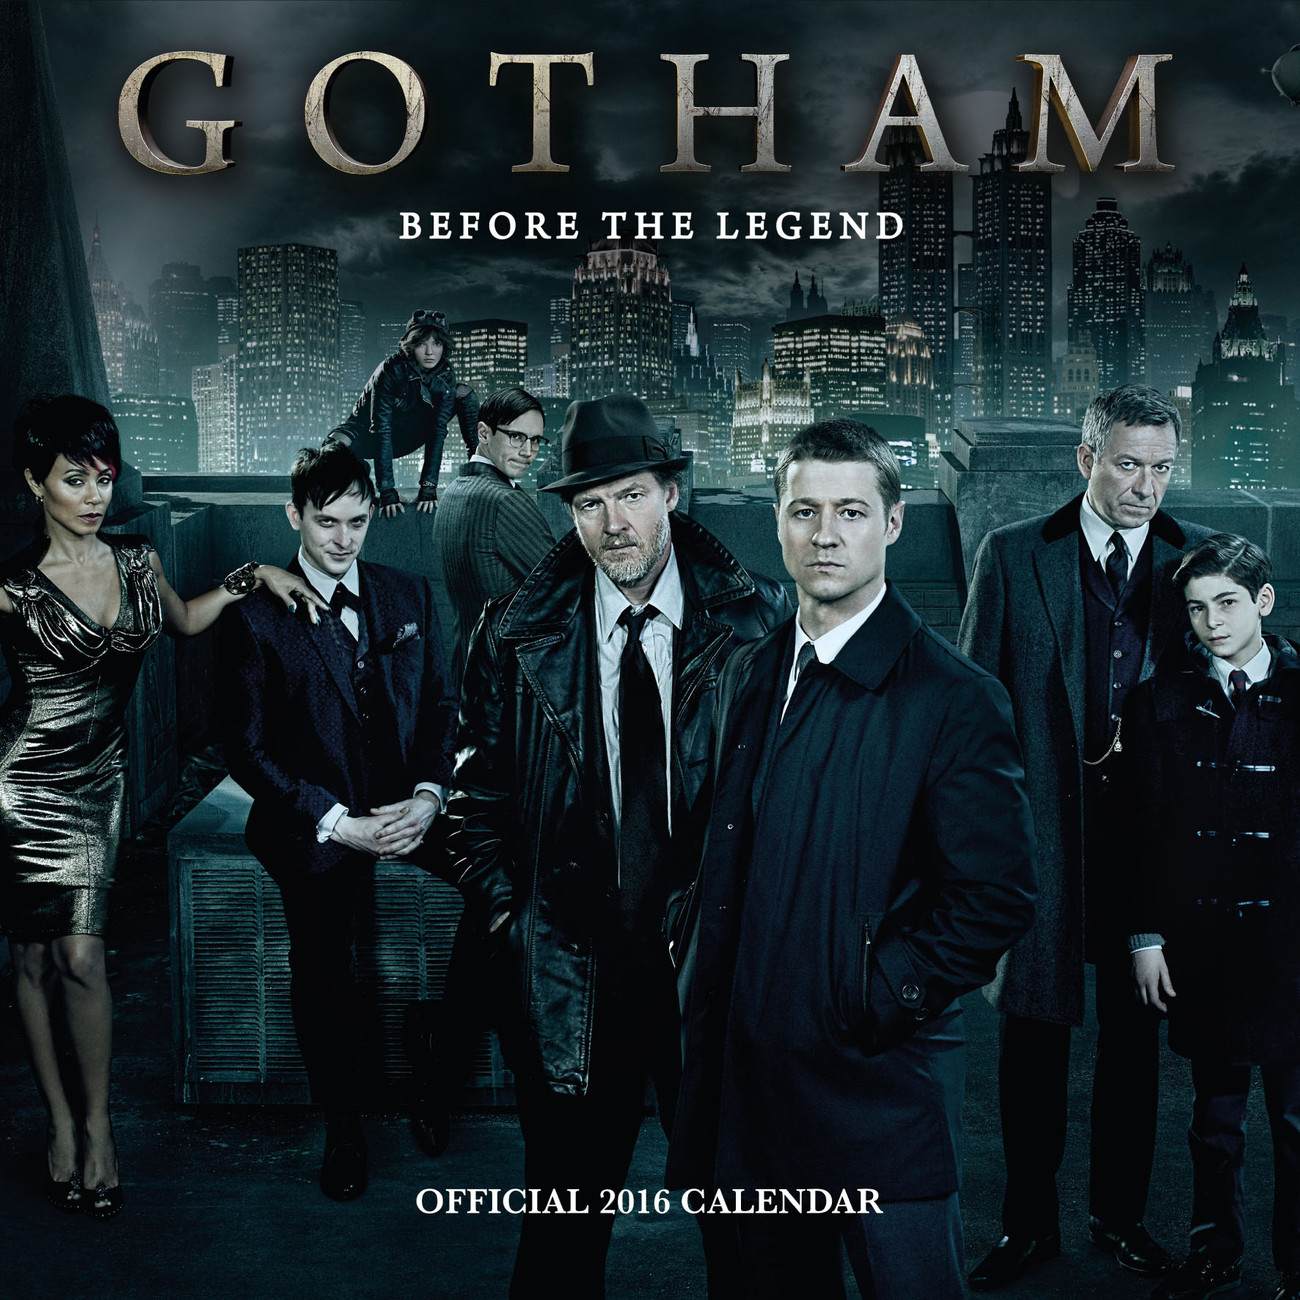 Gotham Calendars 2019 on UKposters/EuroPosters